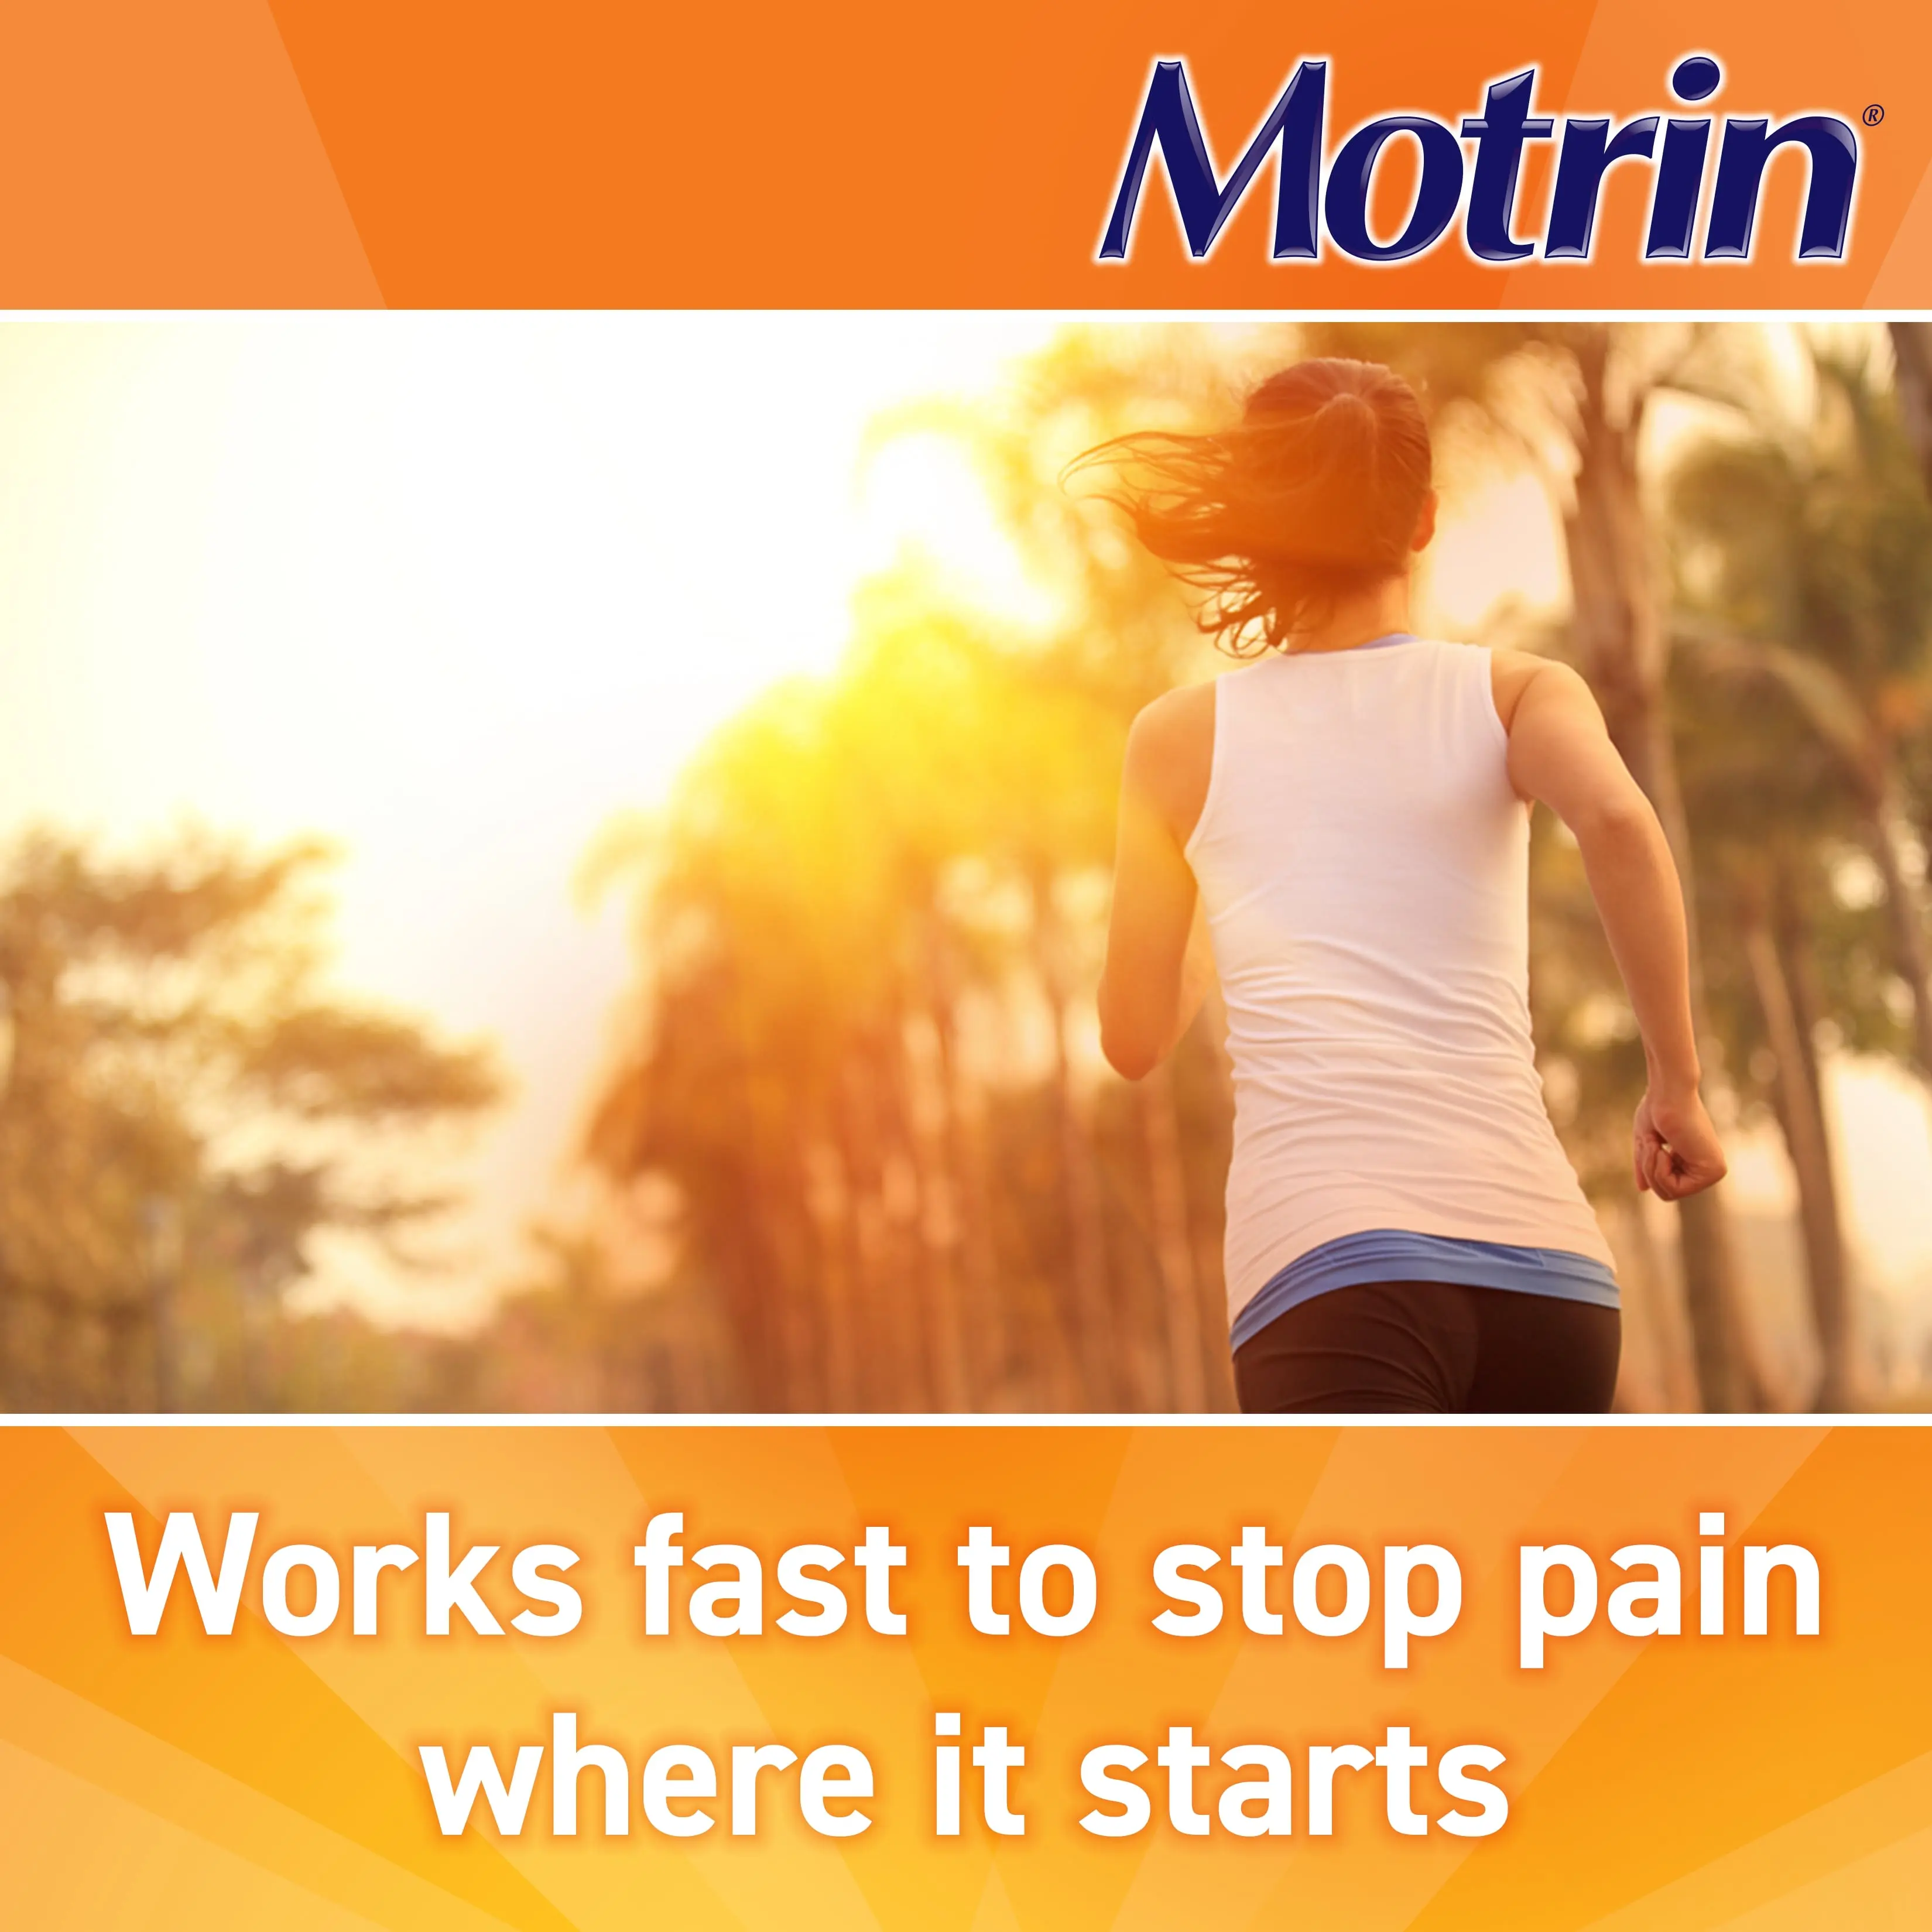 Motrin works fast to stop pain where it starts